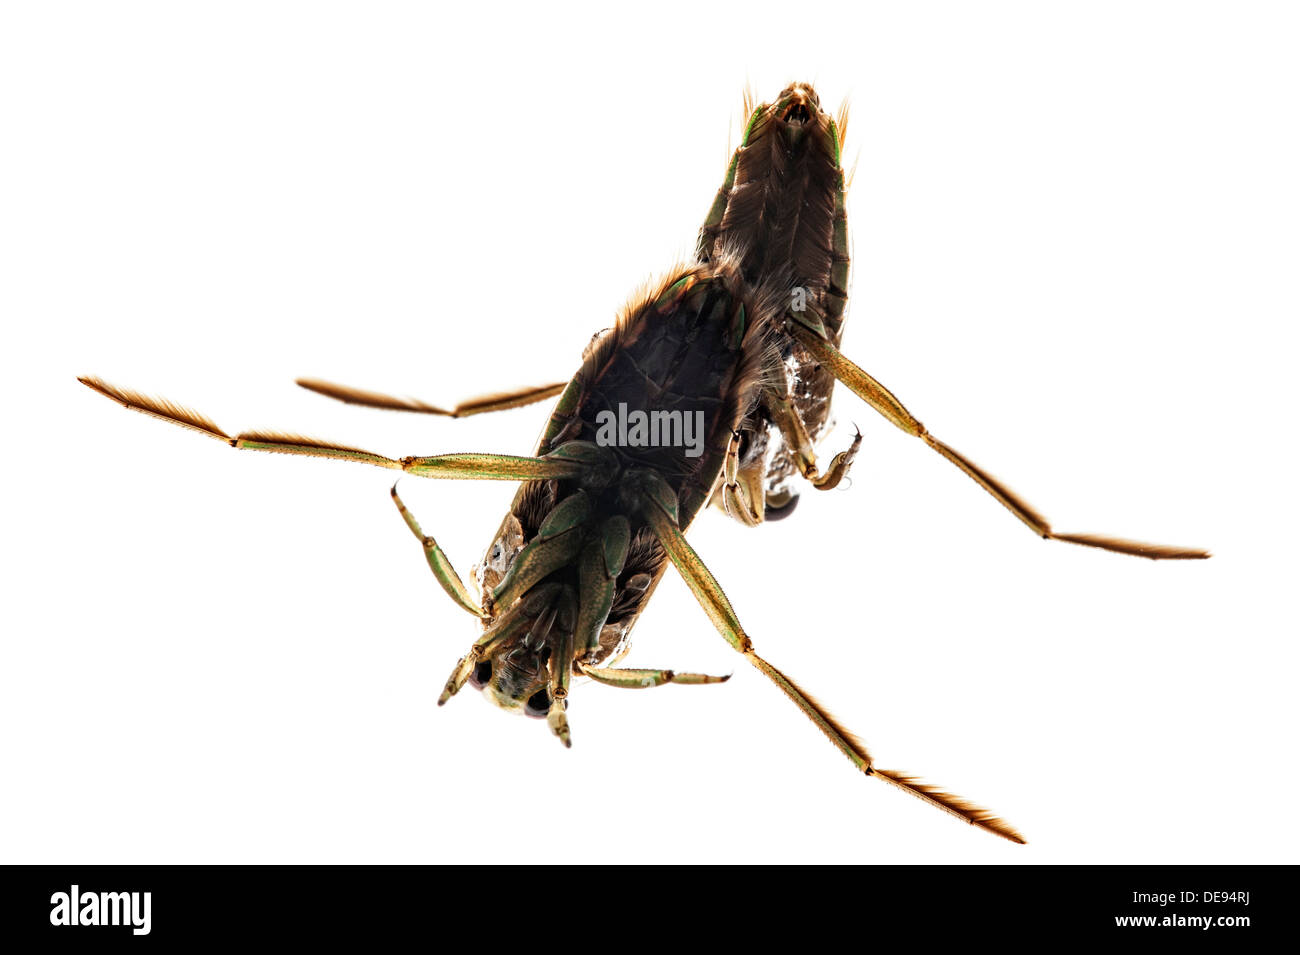 Two Spotted backswimmers / Mottled backswimmer / Peppered water boatman (Notonecta maculata) on white background Stock Photo